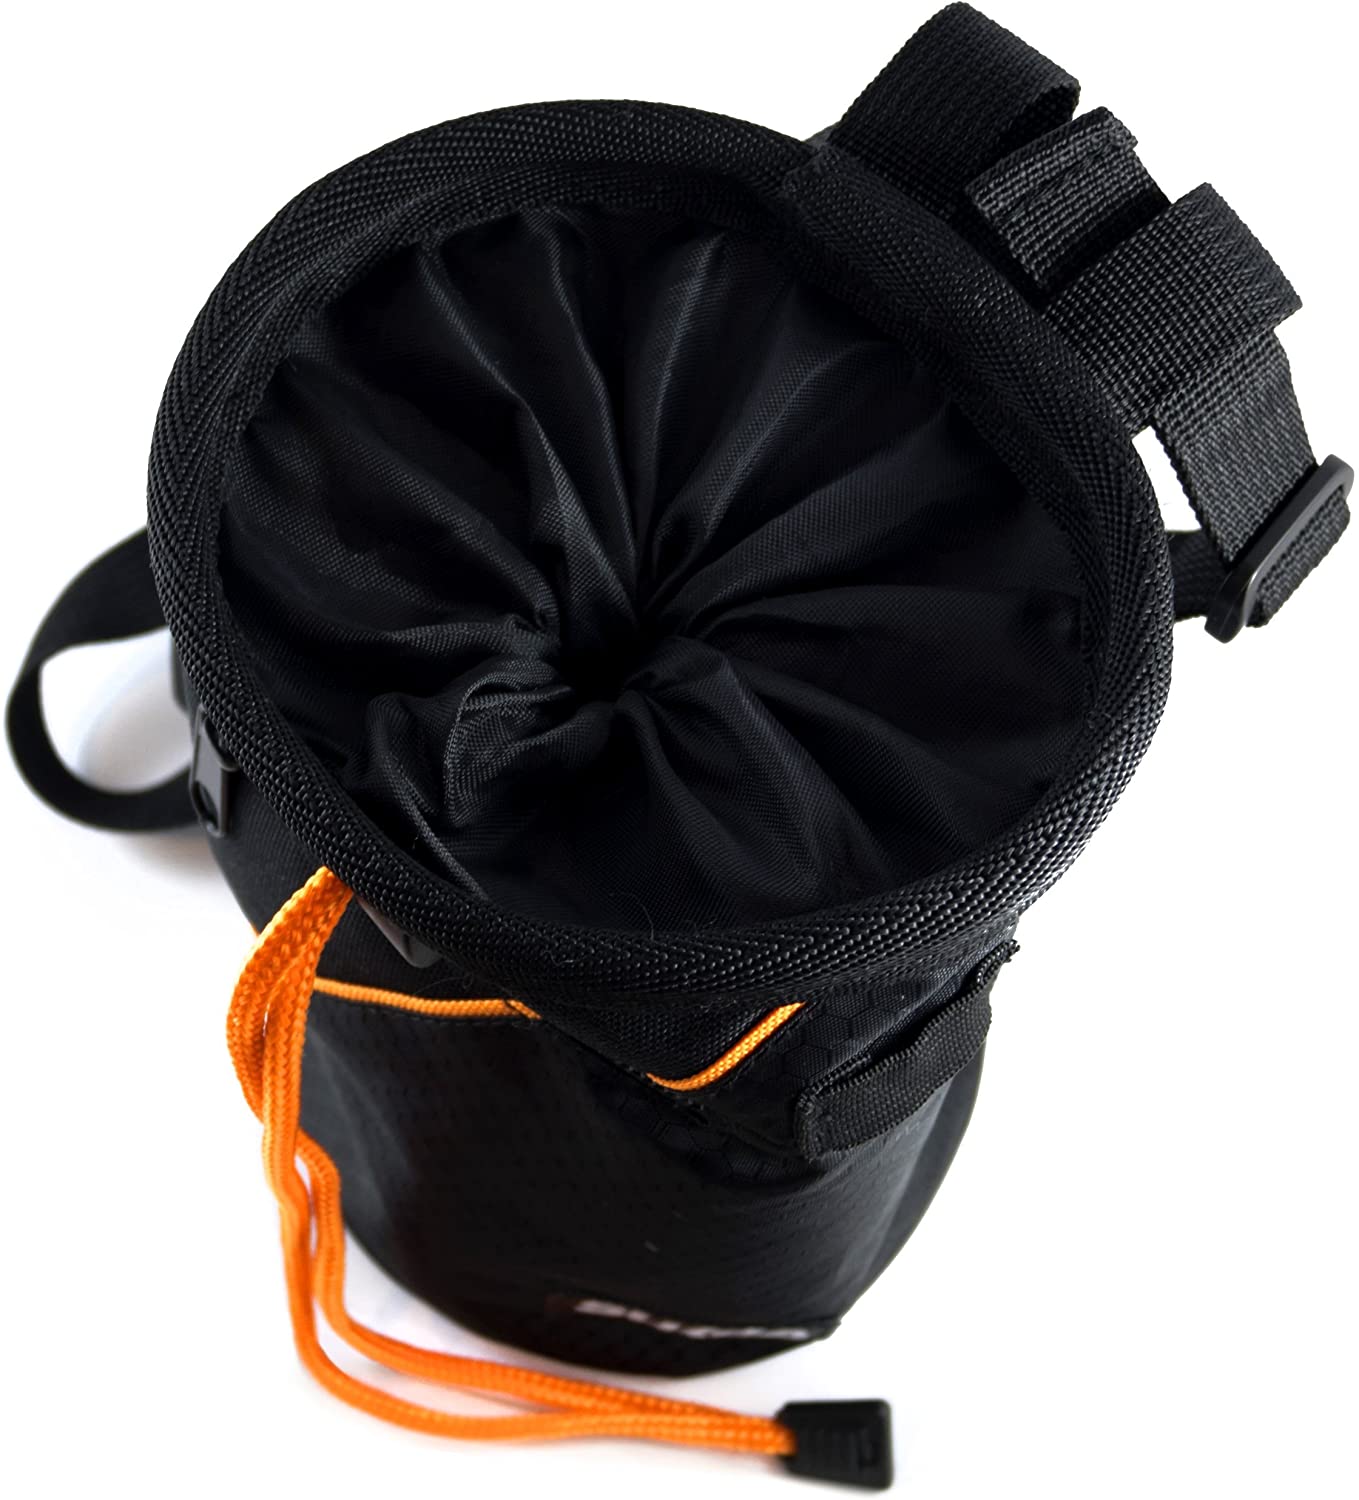 Sukoa Chalk Bag for Rock Climbing - Bouldering Chalk Bag Bucket with  Quick-Clip Belt and 2 Large Zip…See more Sukoa Chalk Bag for Rock Climbing  